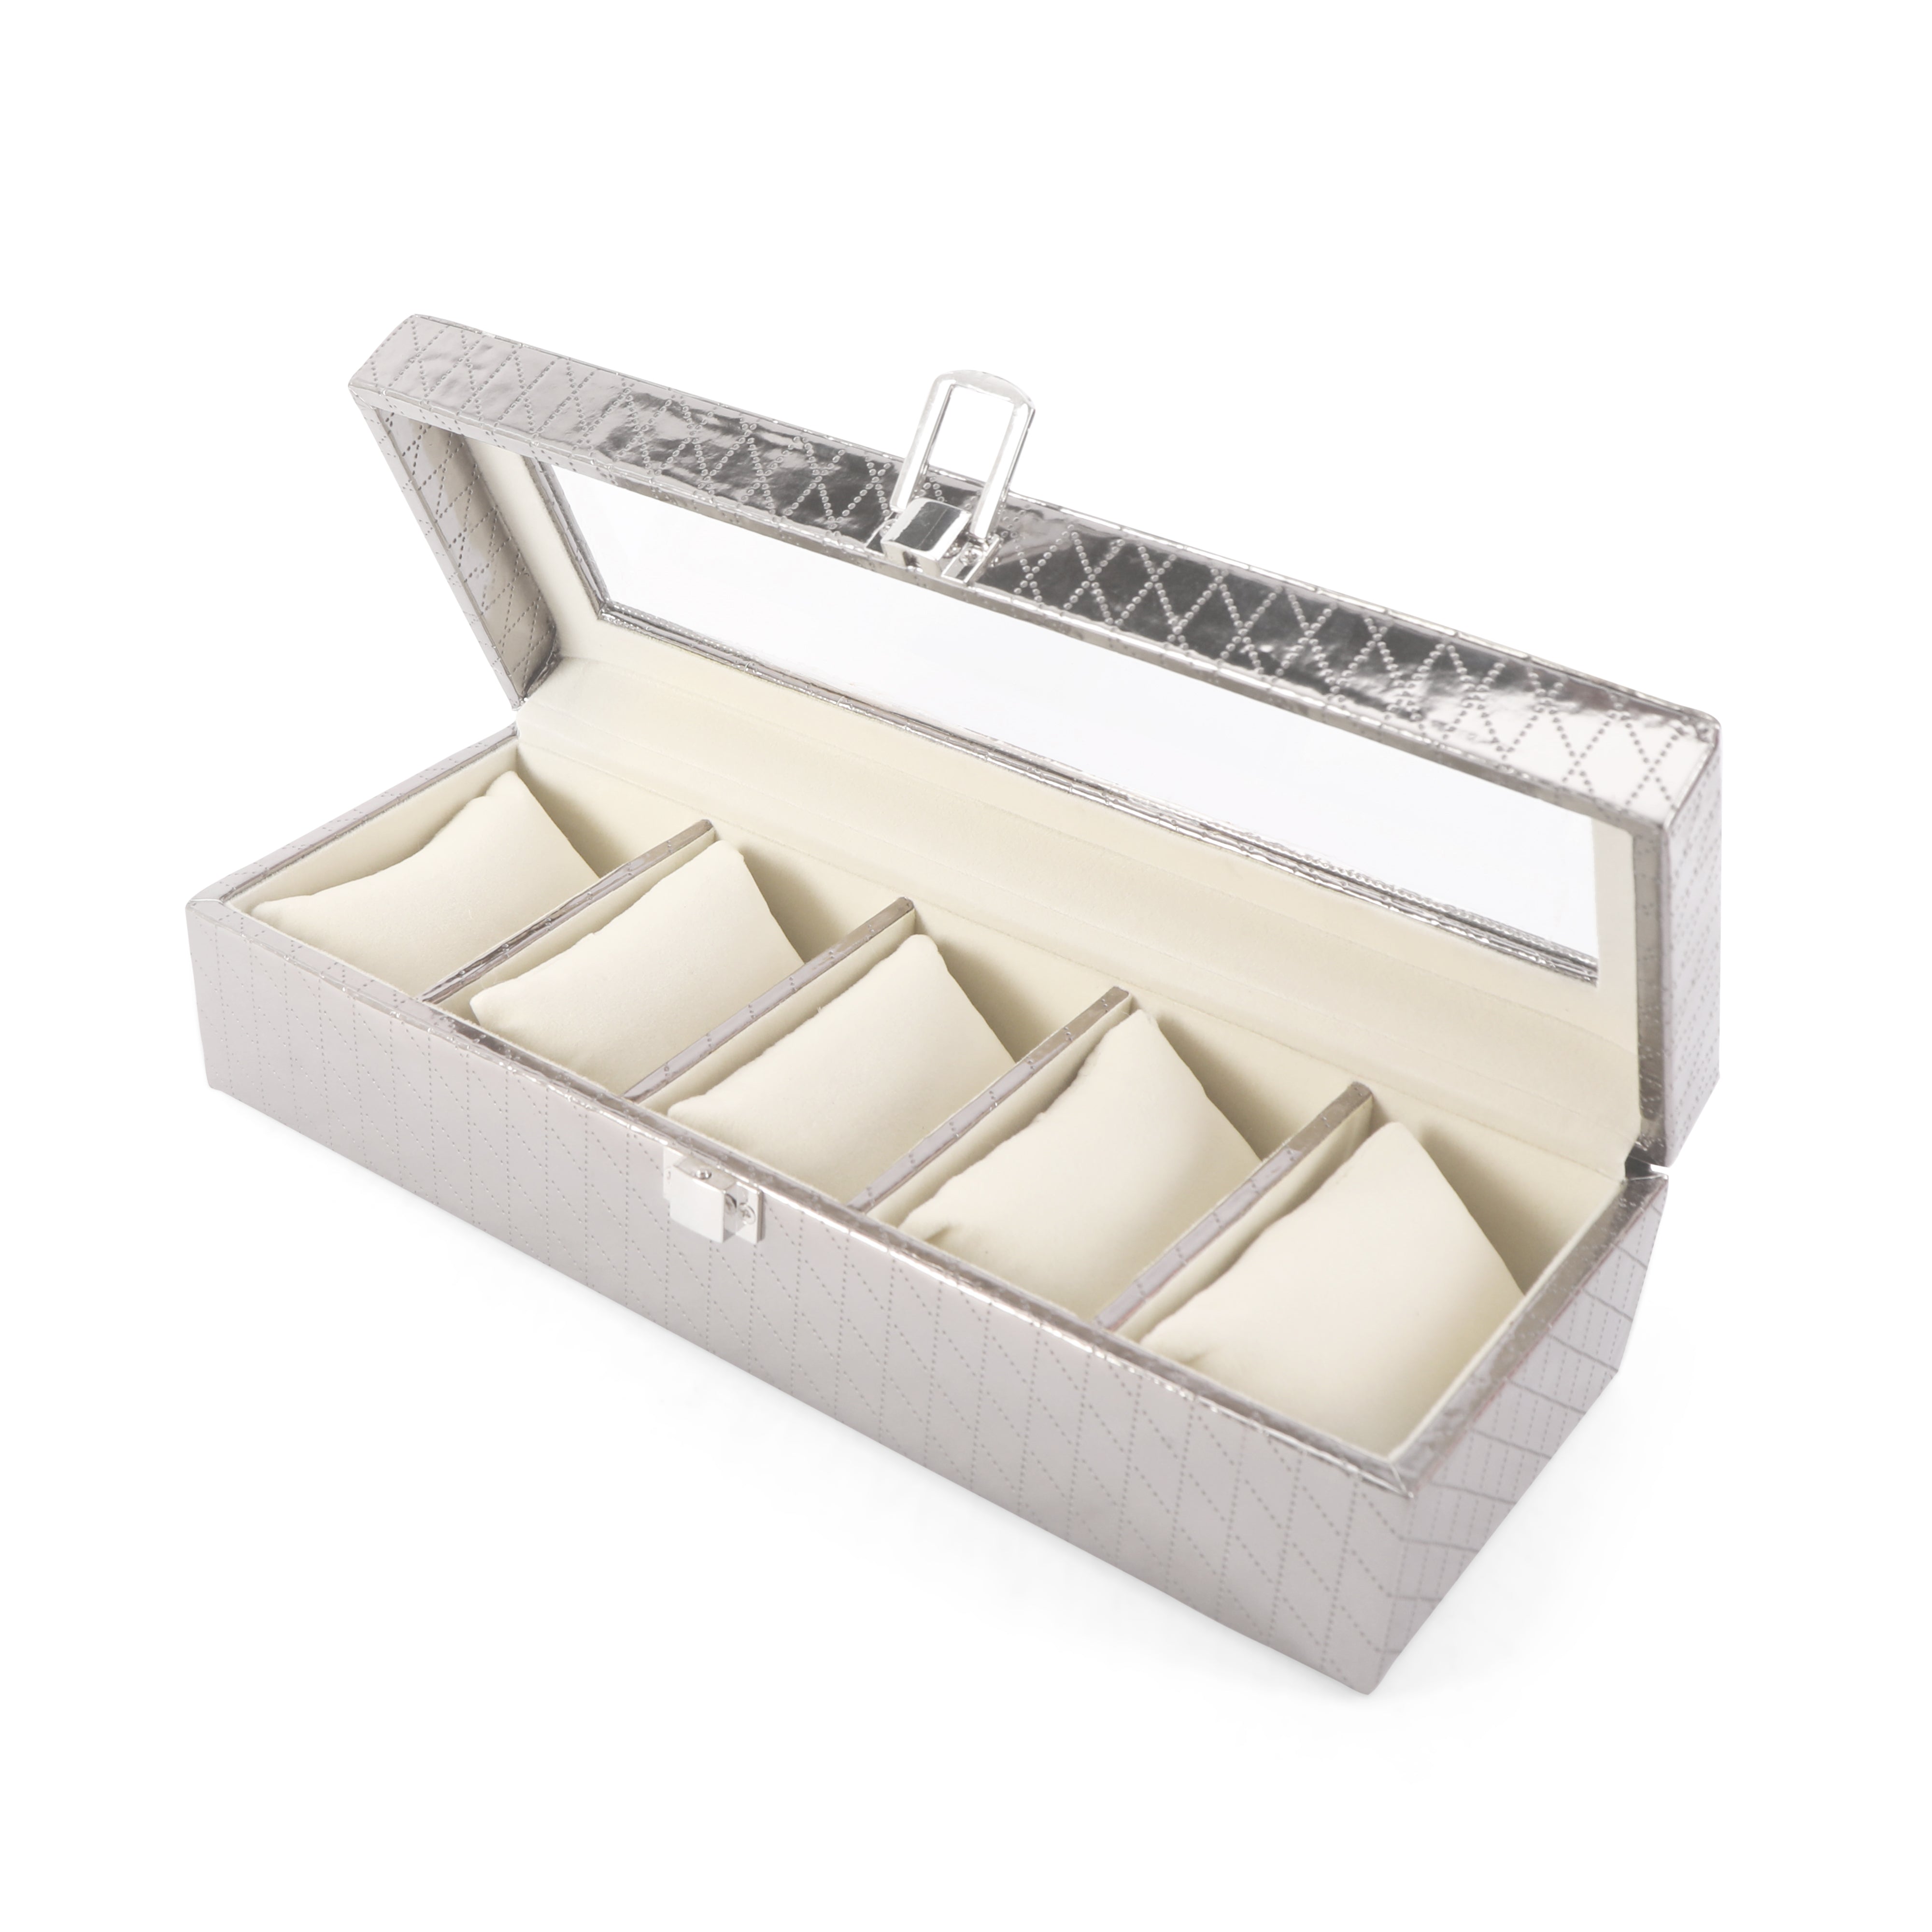 Watchbox 5 Partition - Silver Watch Box 2- The Home Co.